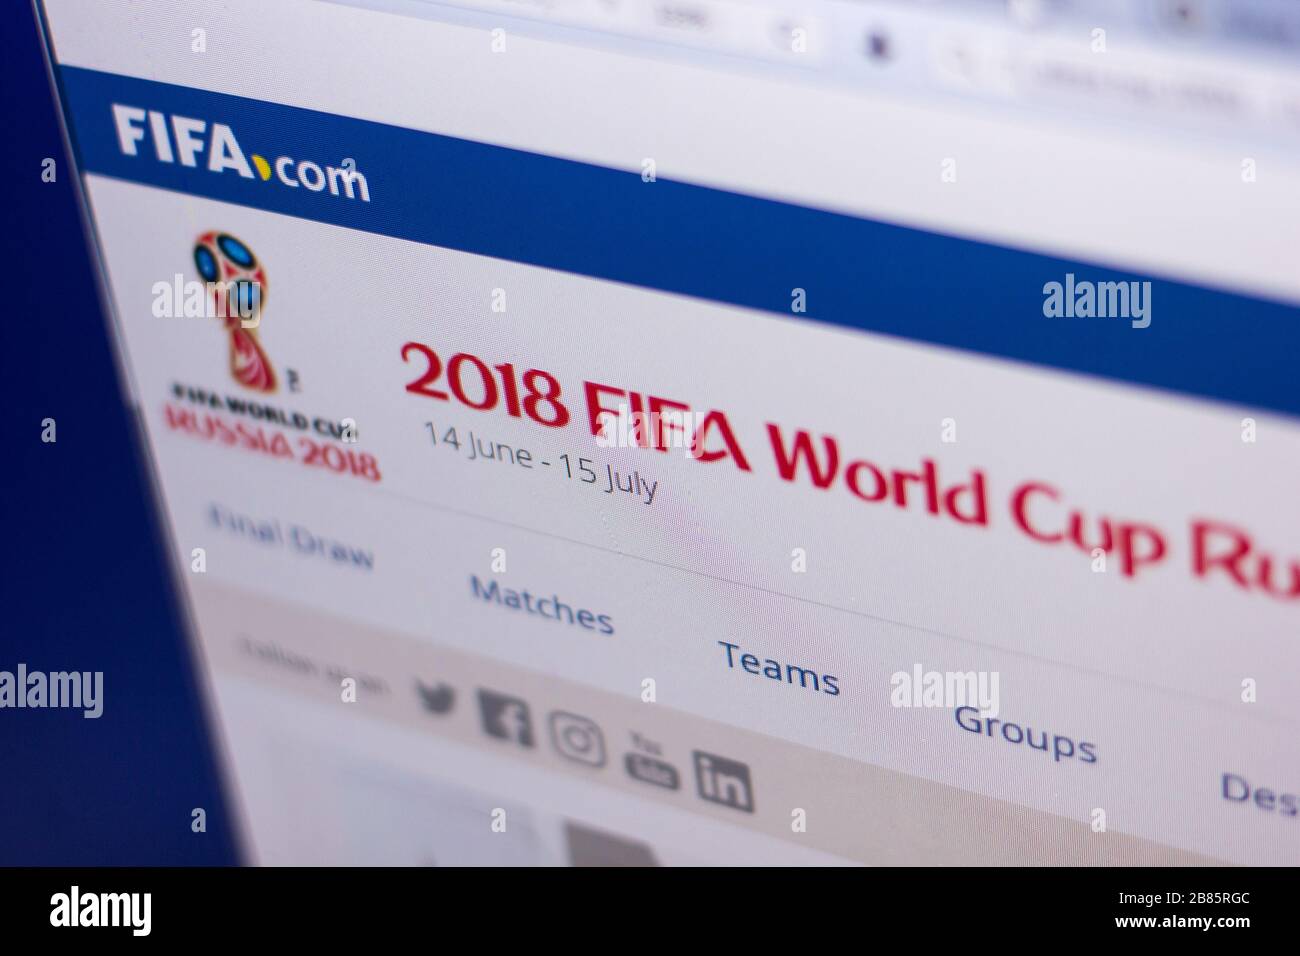 Ryazan, Russia - March 01, 2018 - Official page of 2018 FIFA World Cup Russia at the display of PC Stock Photo